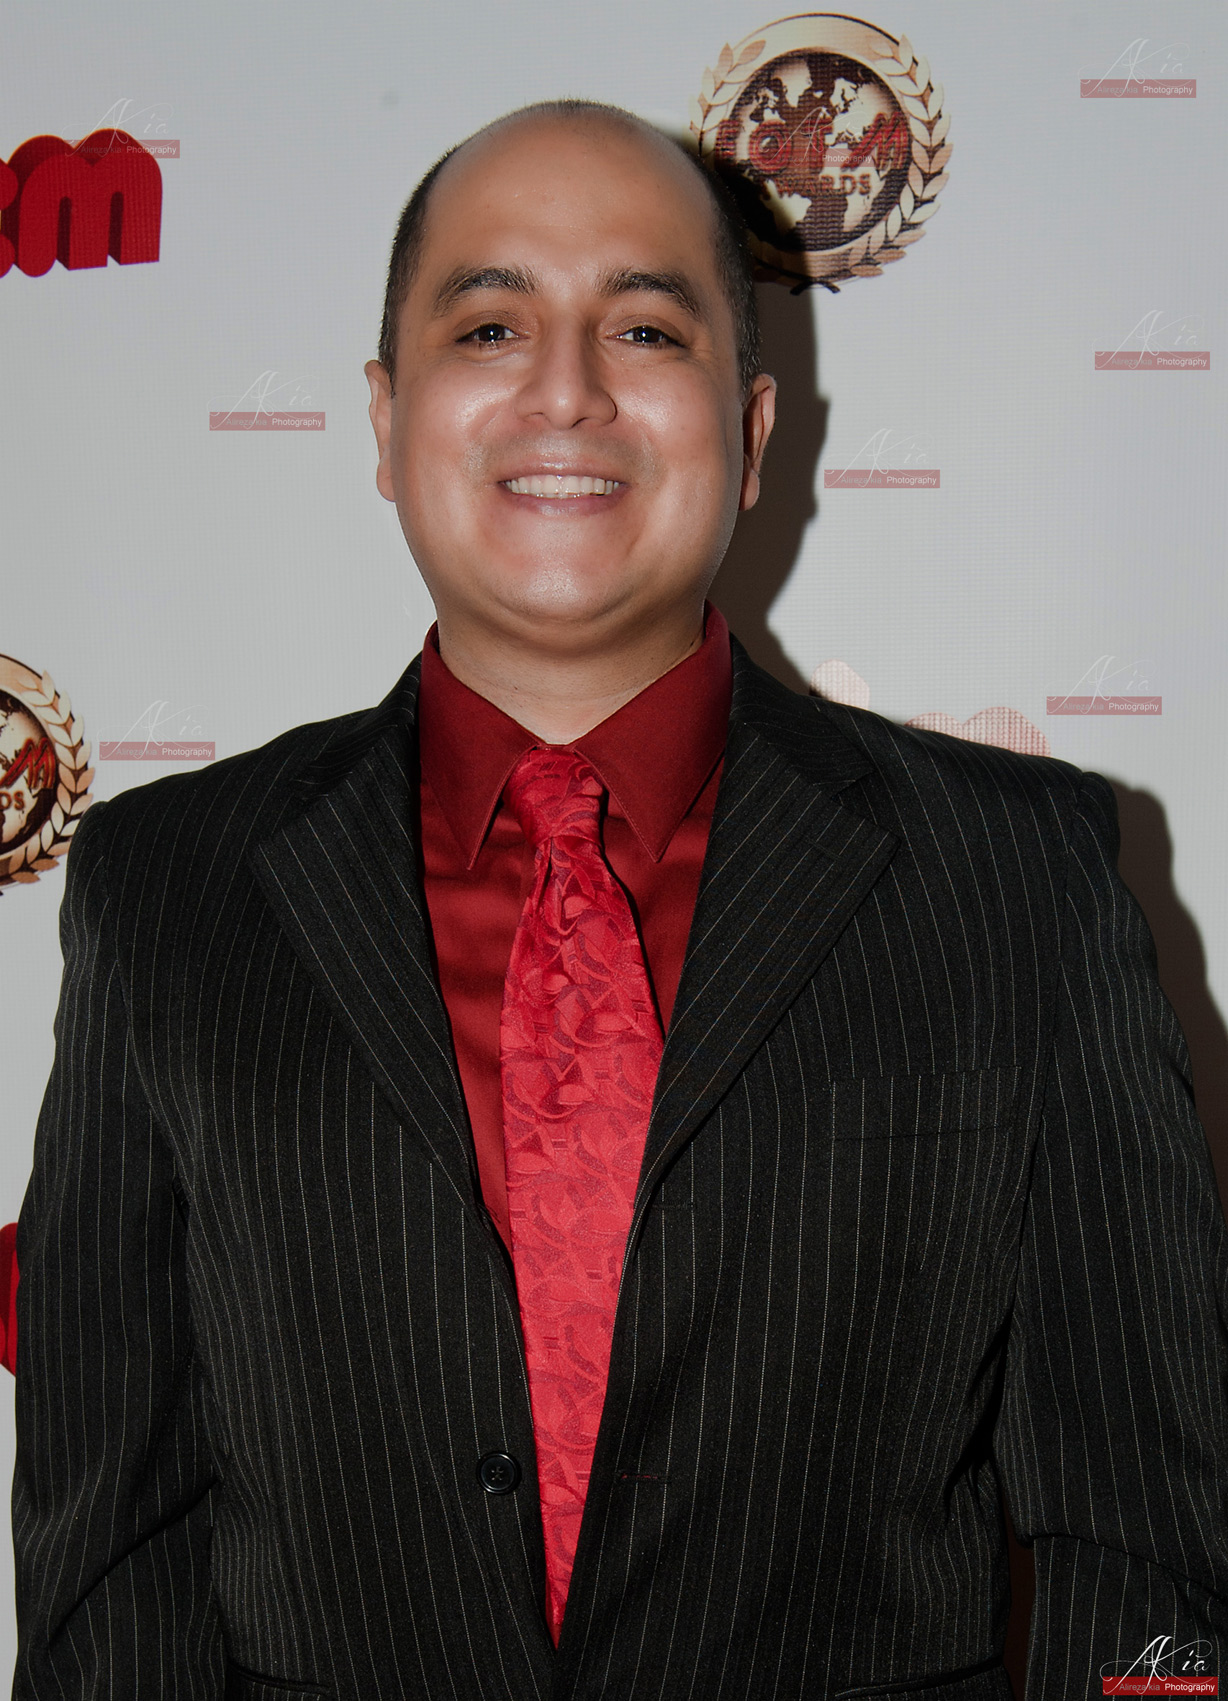 Steven Escobar red carpet arrival at 2013 EOTM Awards in West Hollywood, CA.